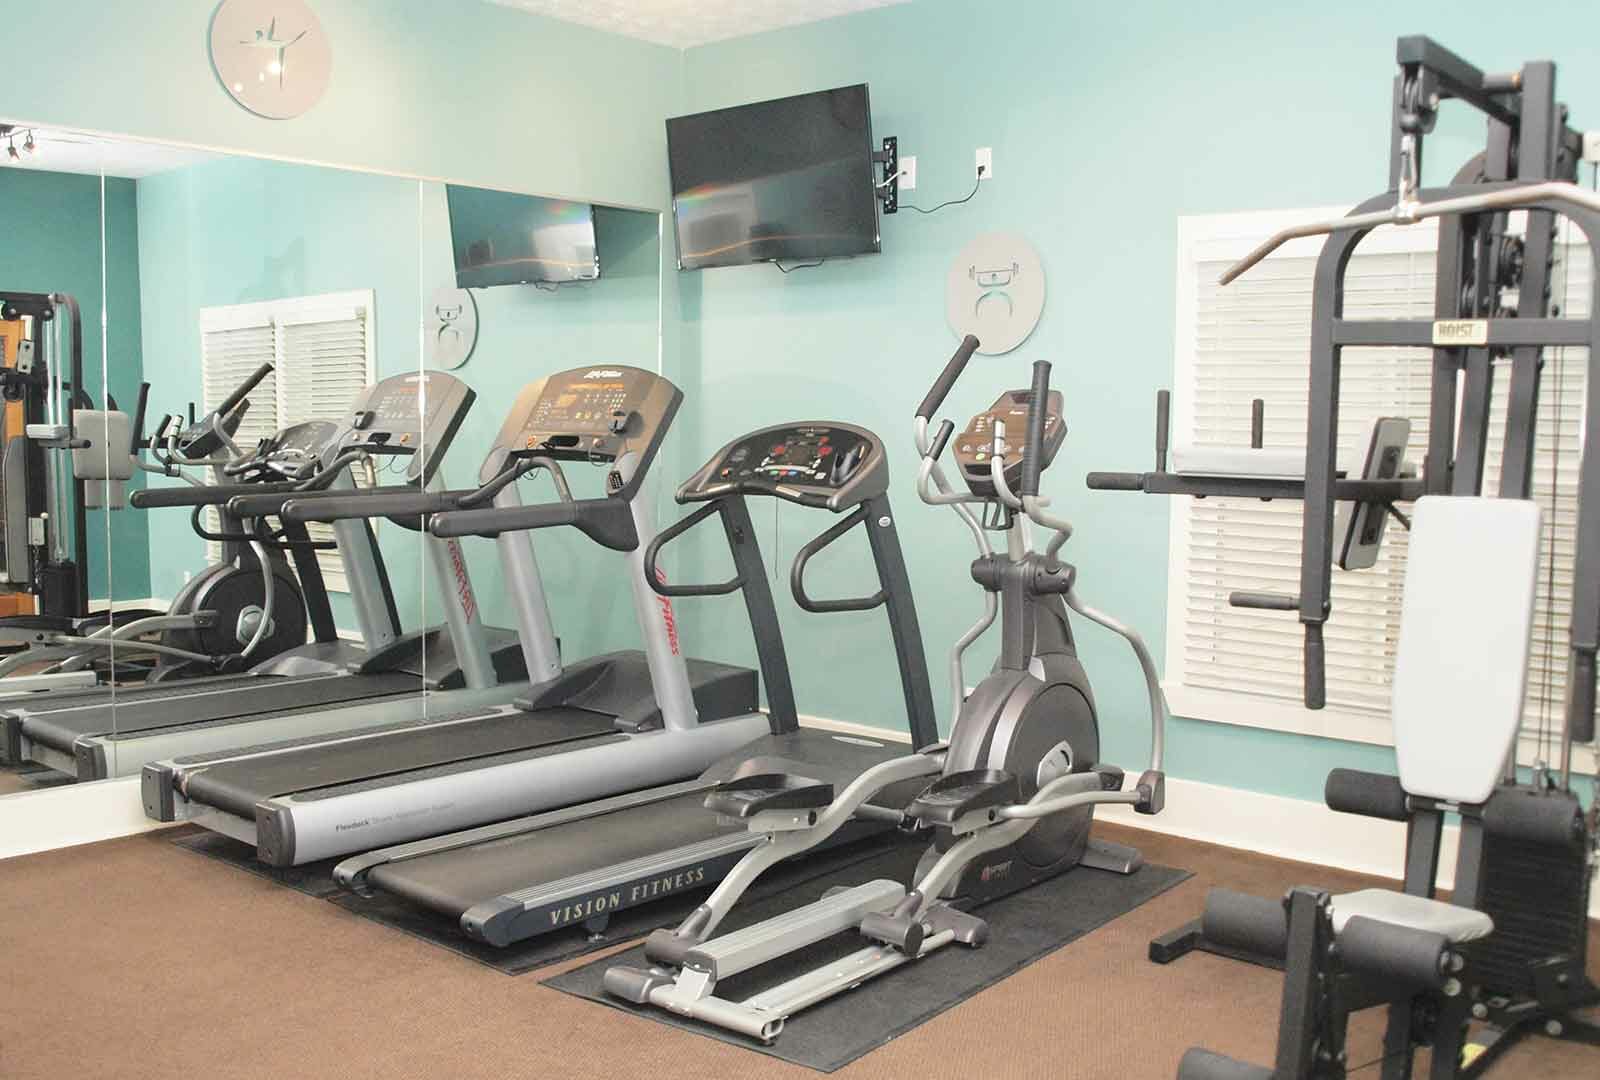 Fitness center with machines at Fox Chase South.